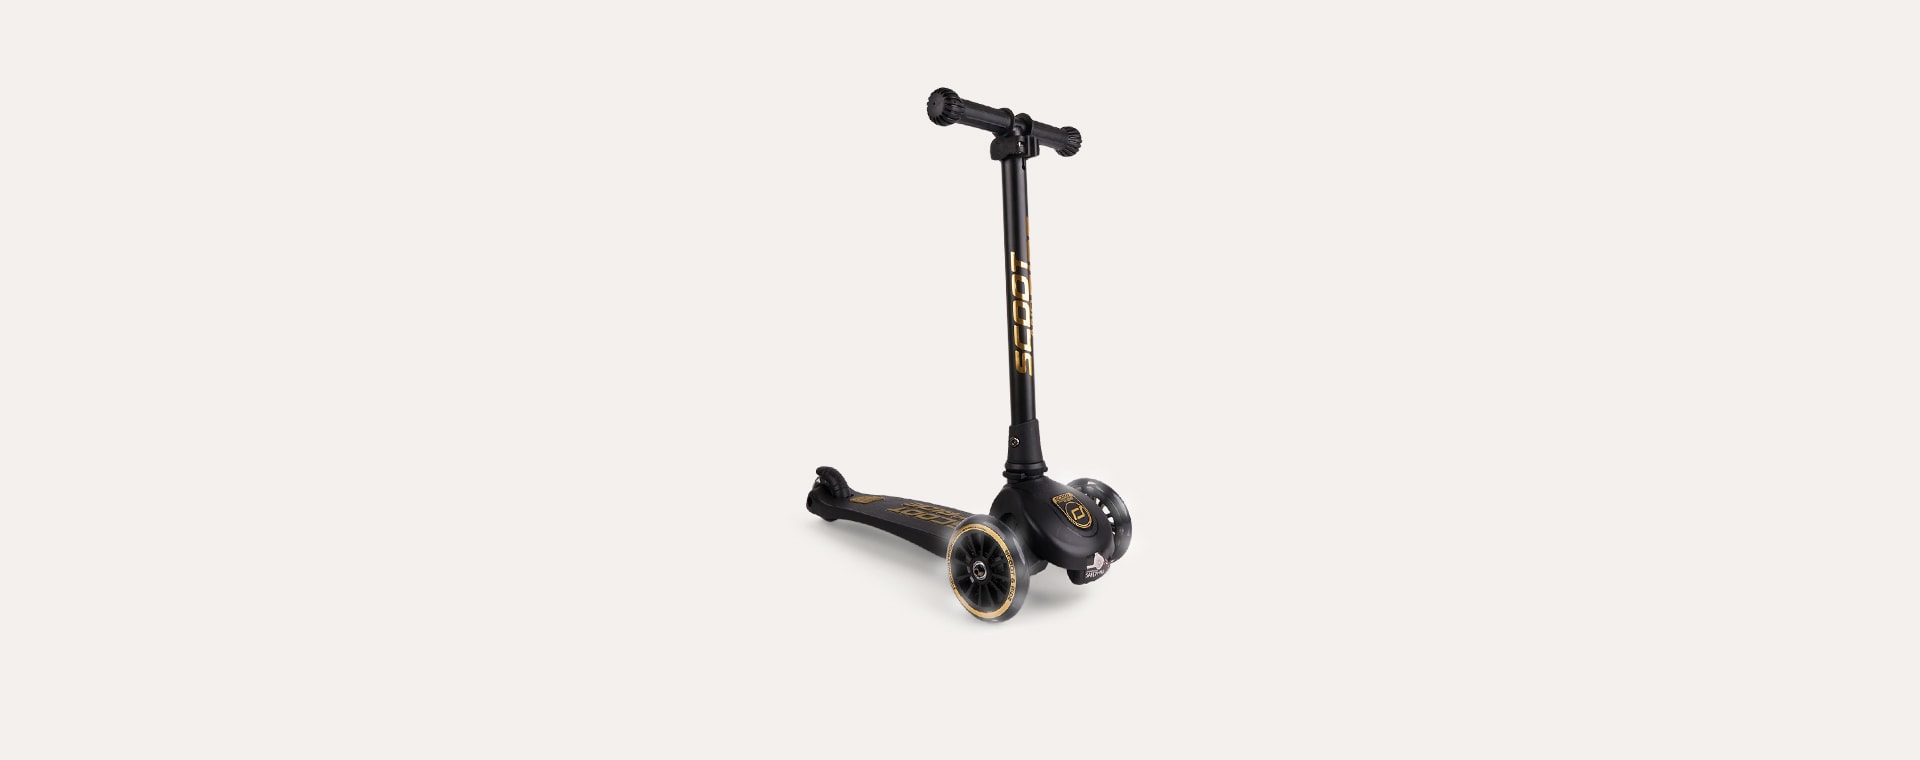 Black and Gold Scoot & Ride Highwaykick 3 LED Scooter